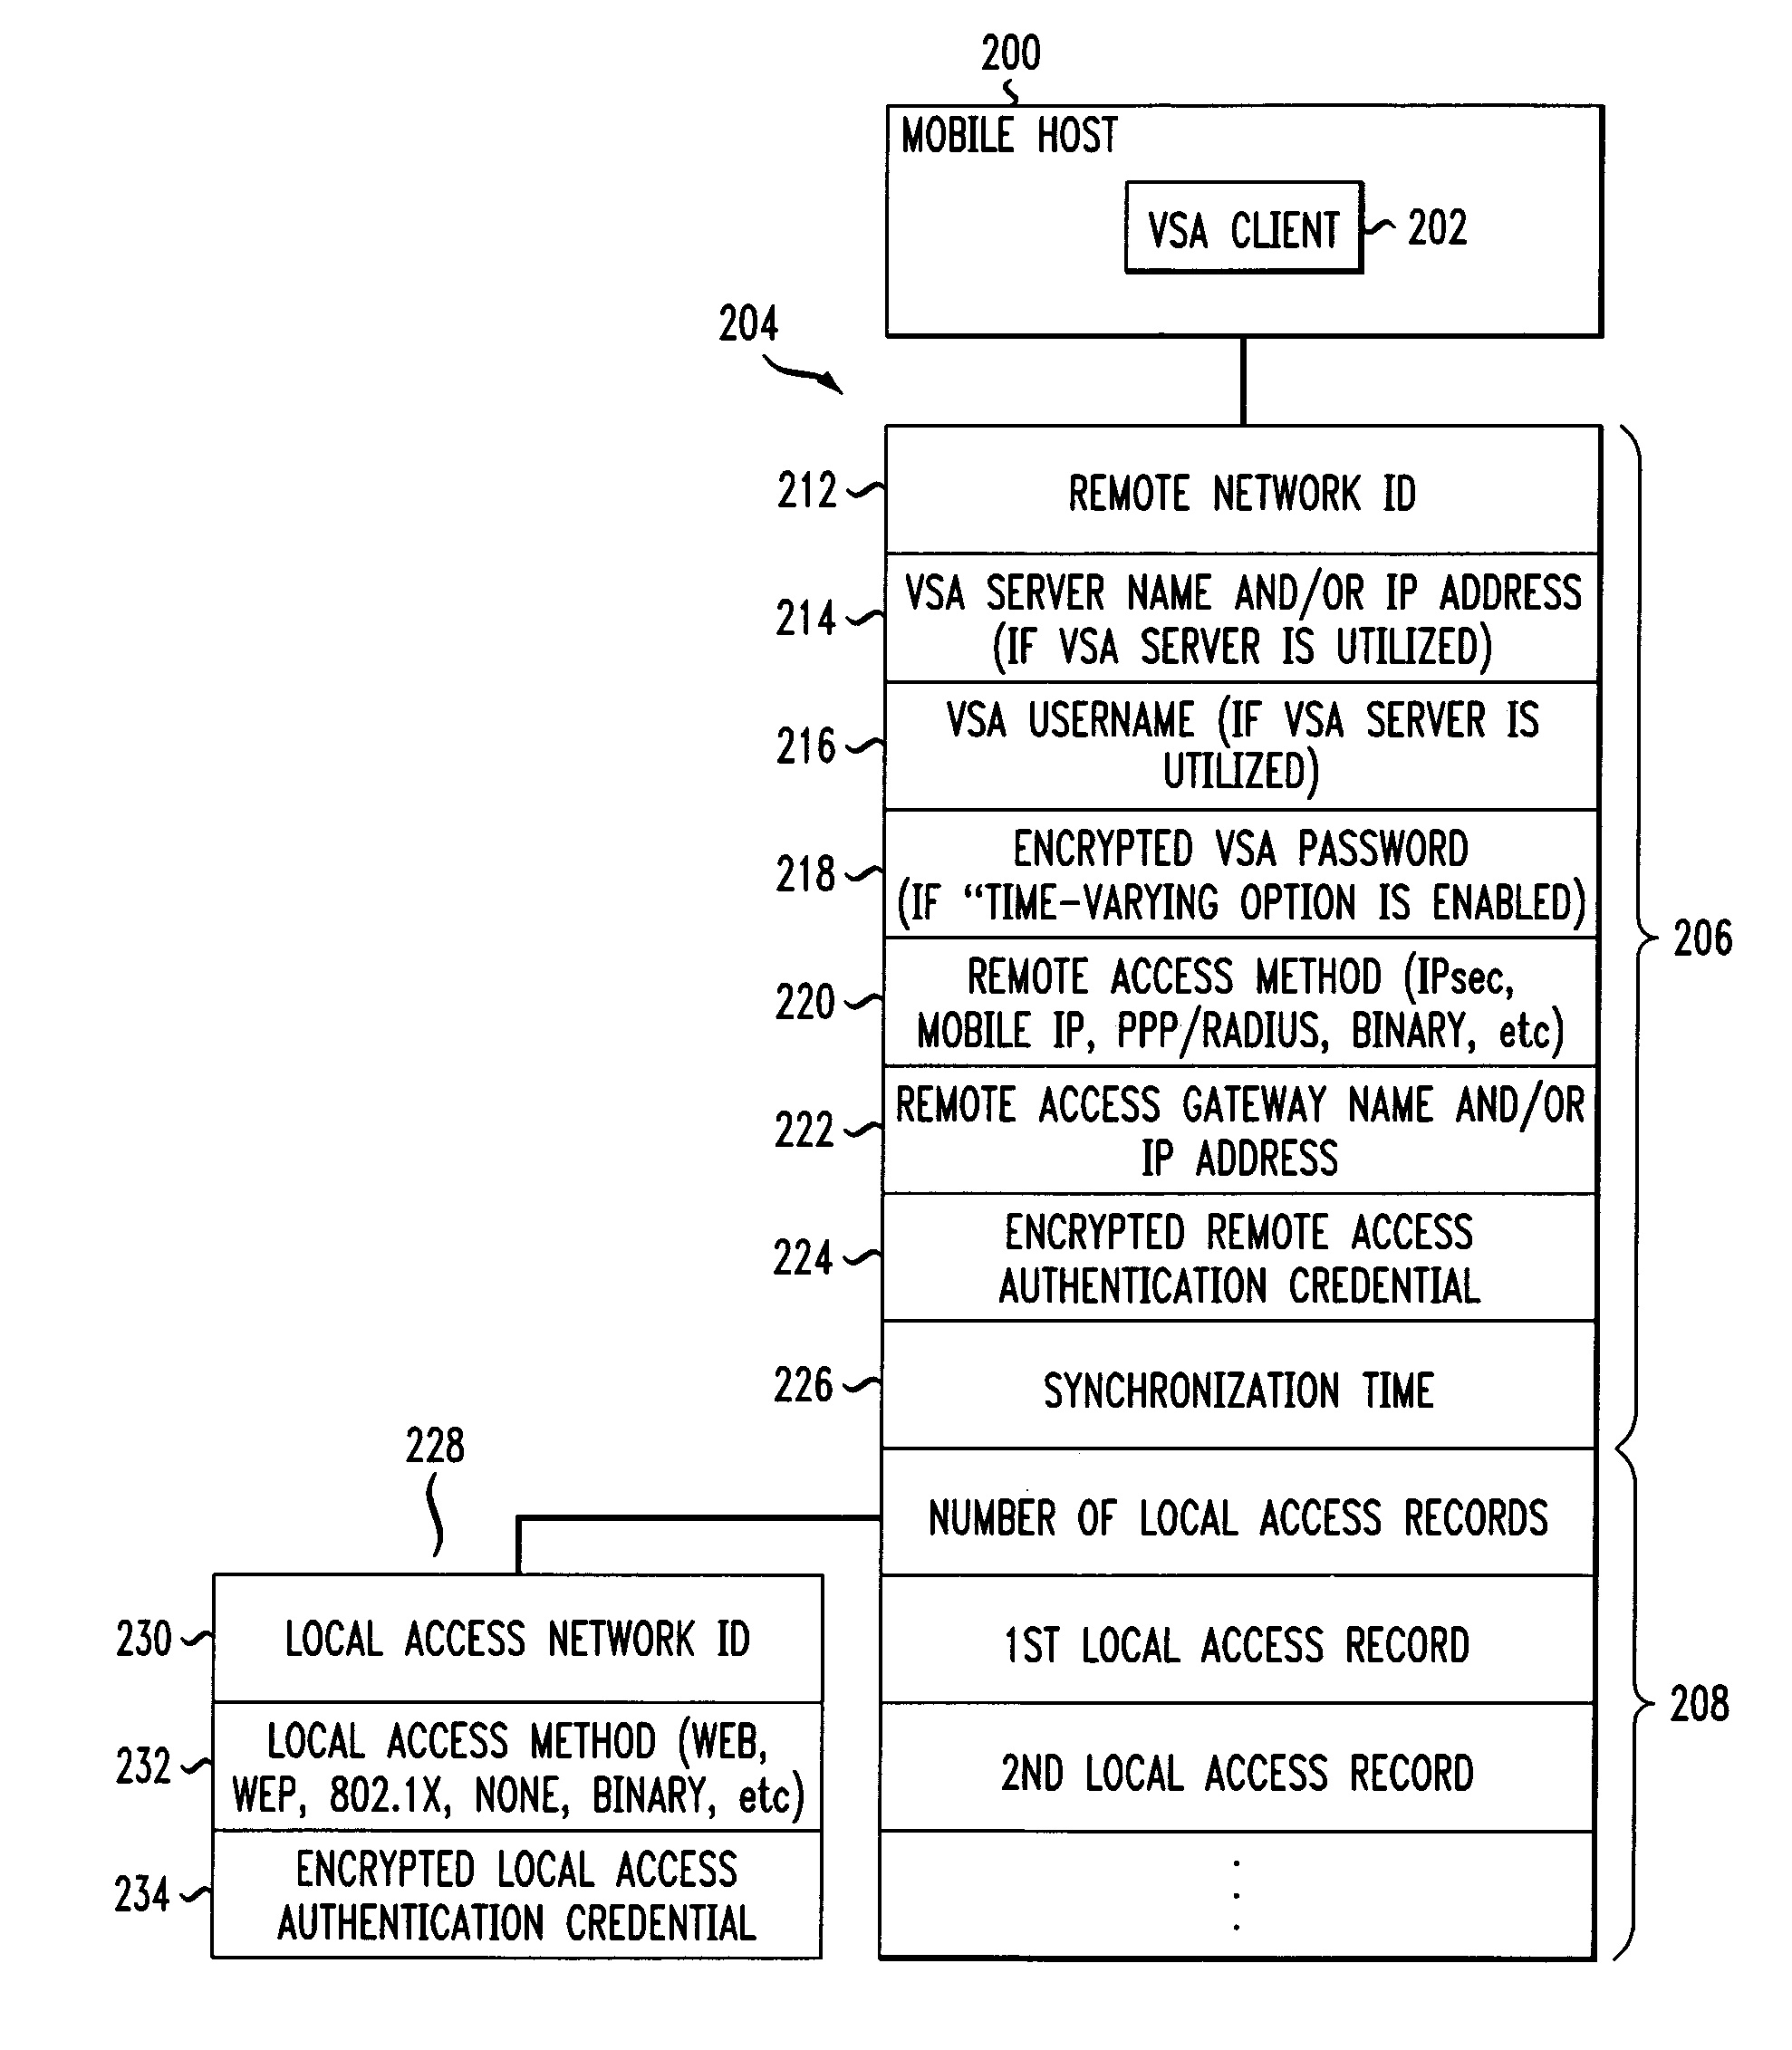 Mobile host using a virtual single account client and server system for network access and management